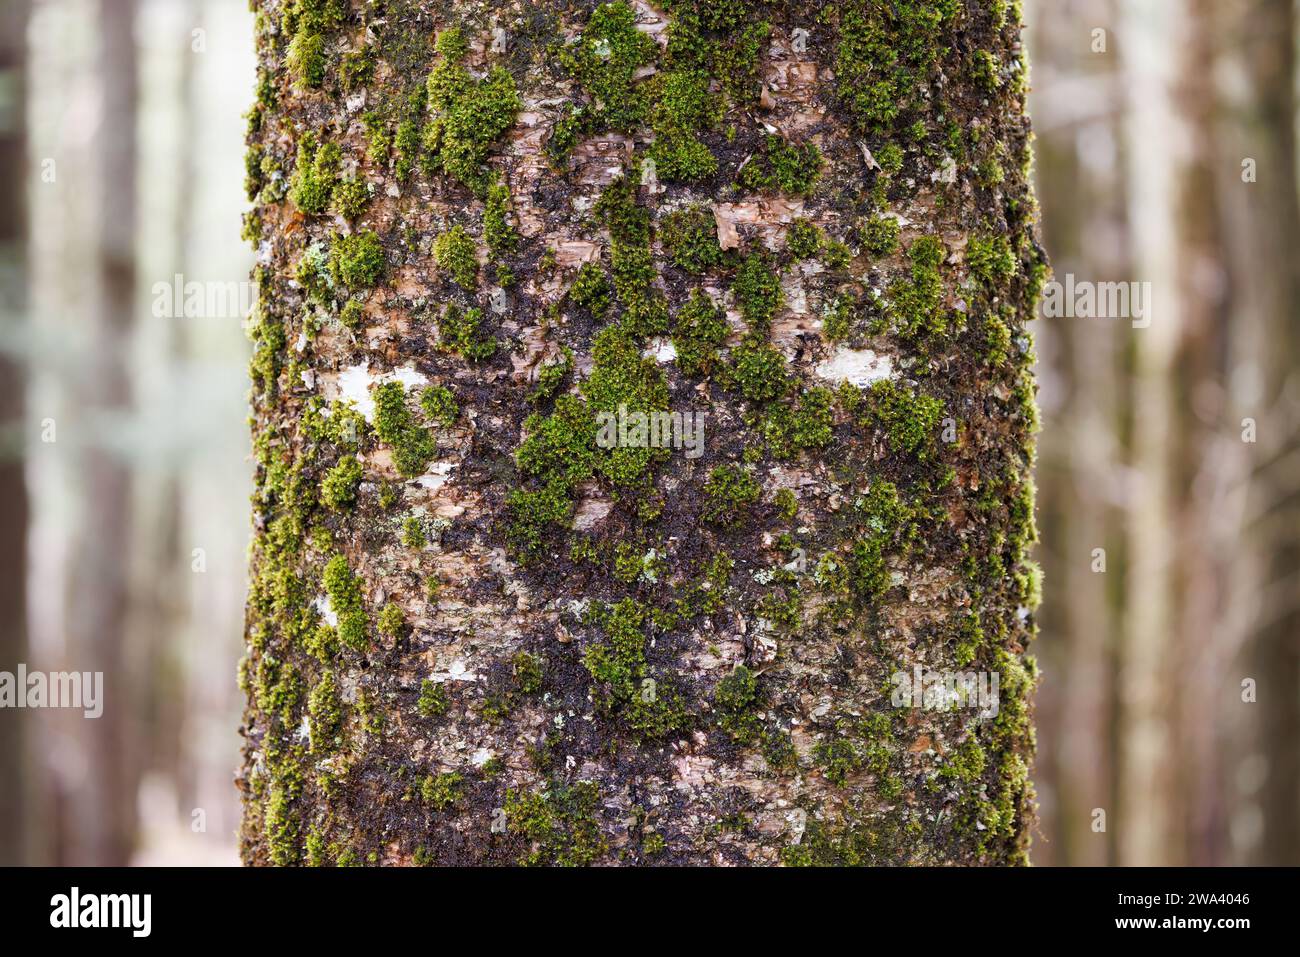 A close-up image of a tree trunk covered with moss and lichen. Stock Photo